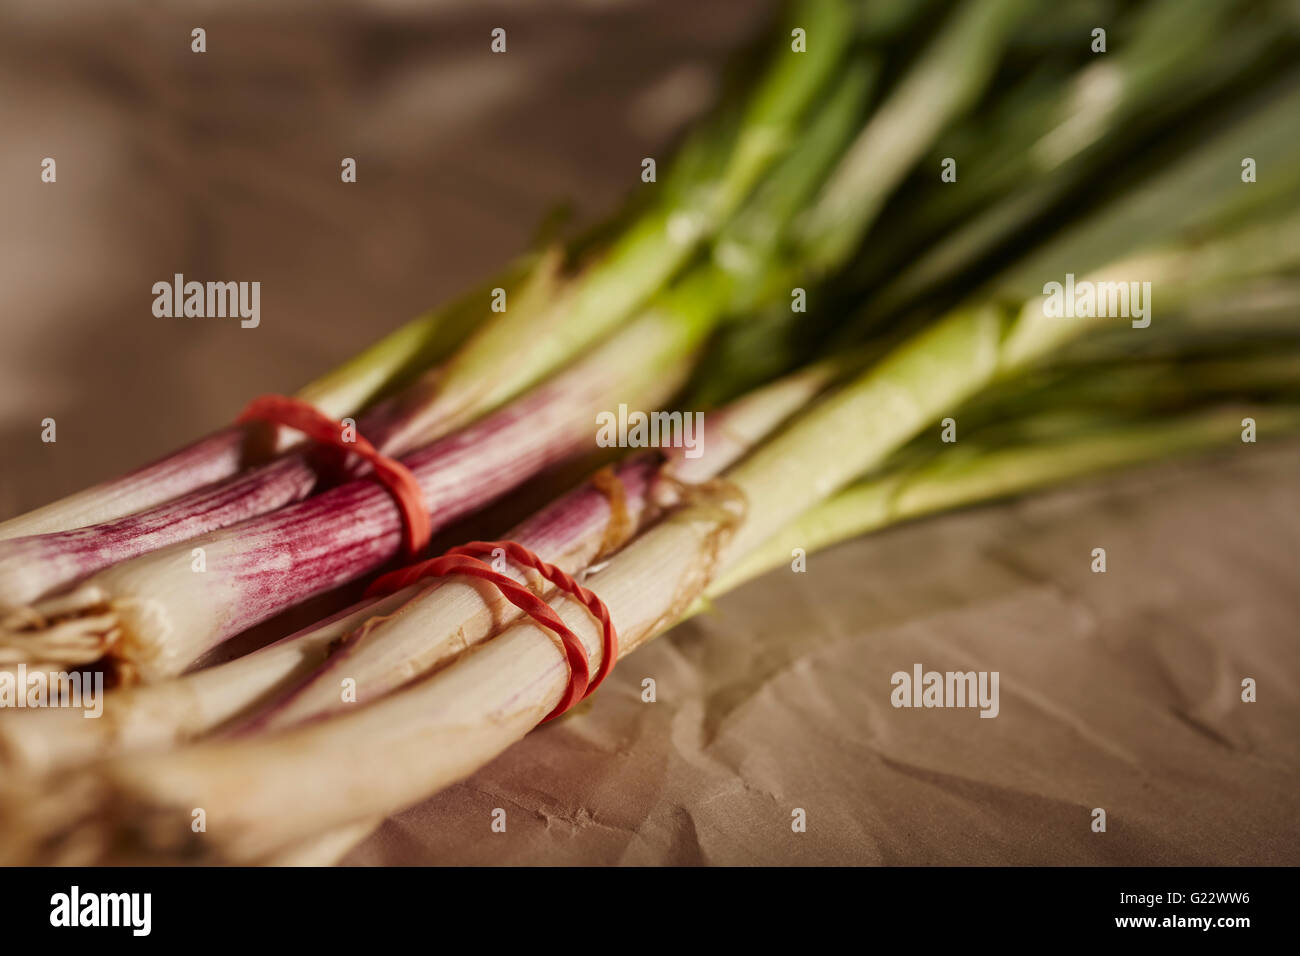 bunches of garlic greens Stock Photo